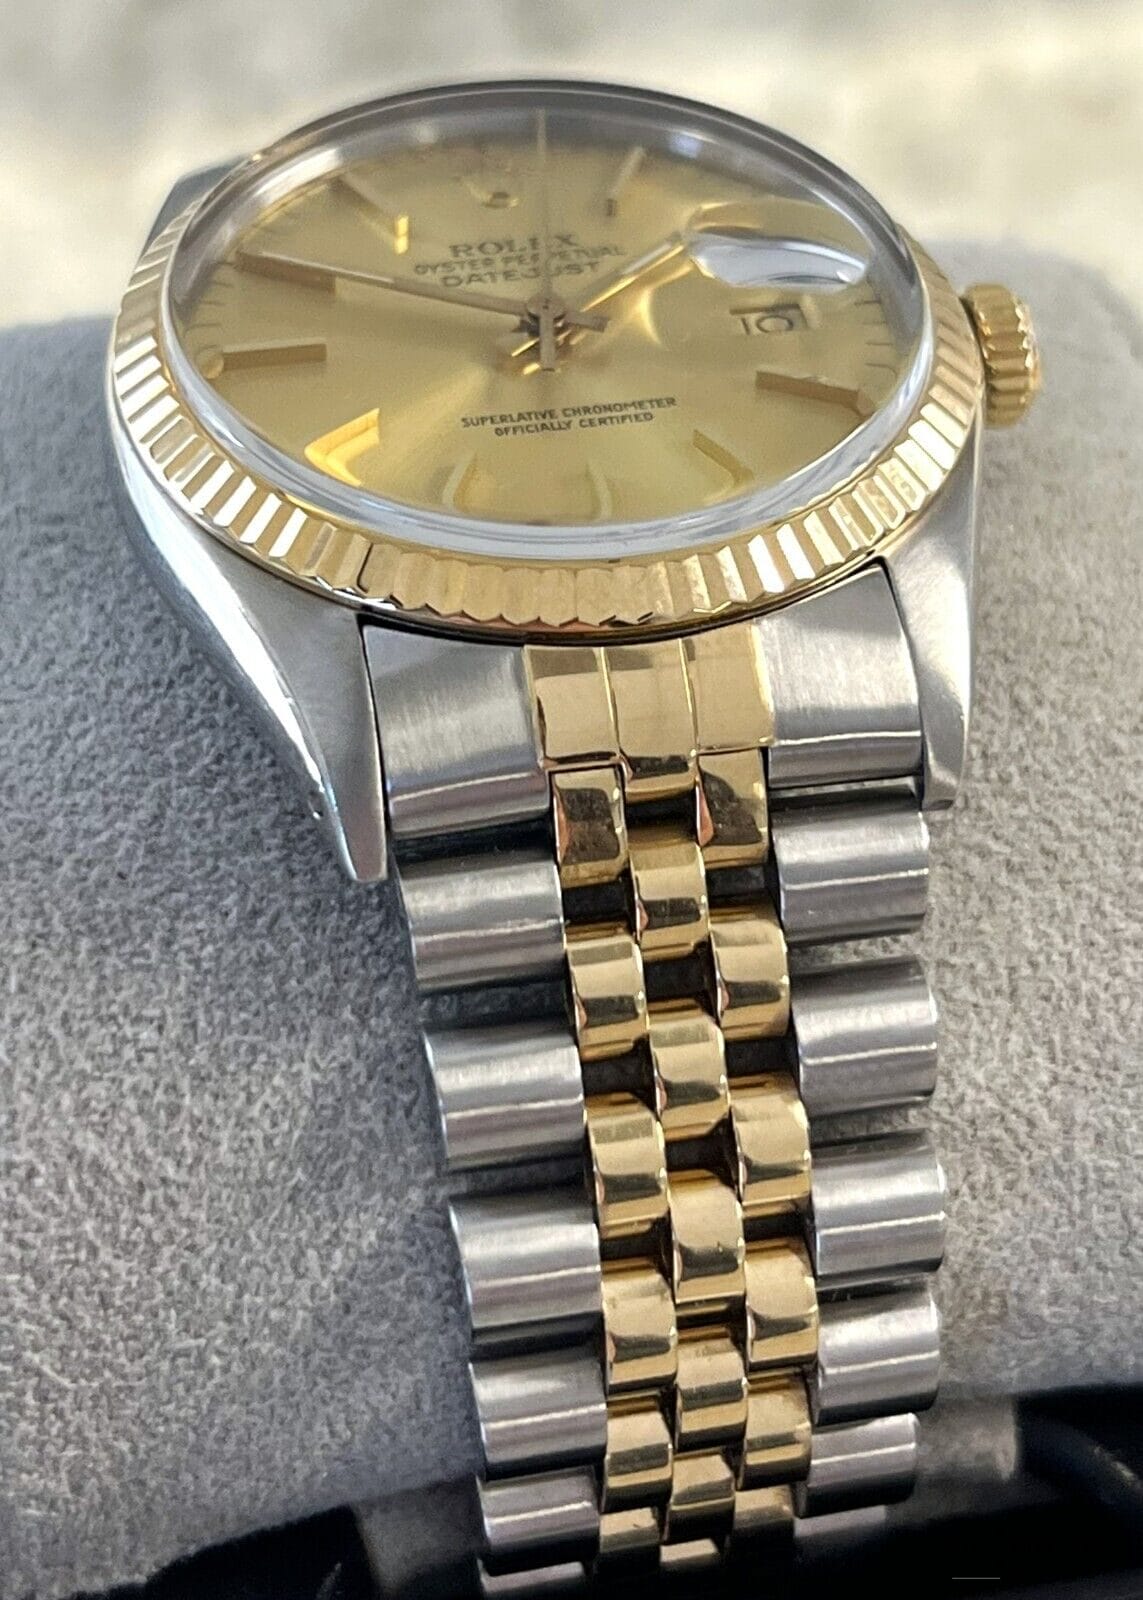 1986 Rolex Datejust 36mm 16013 18K Yellow Gold & Stainless Steel!